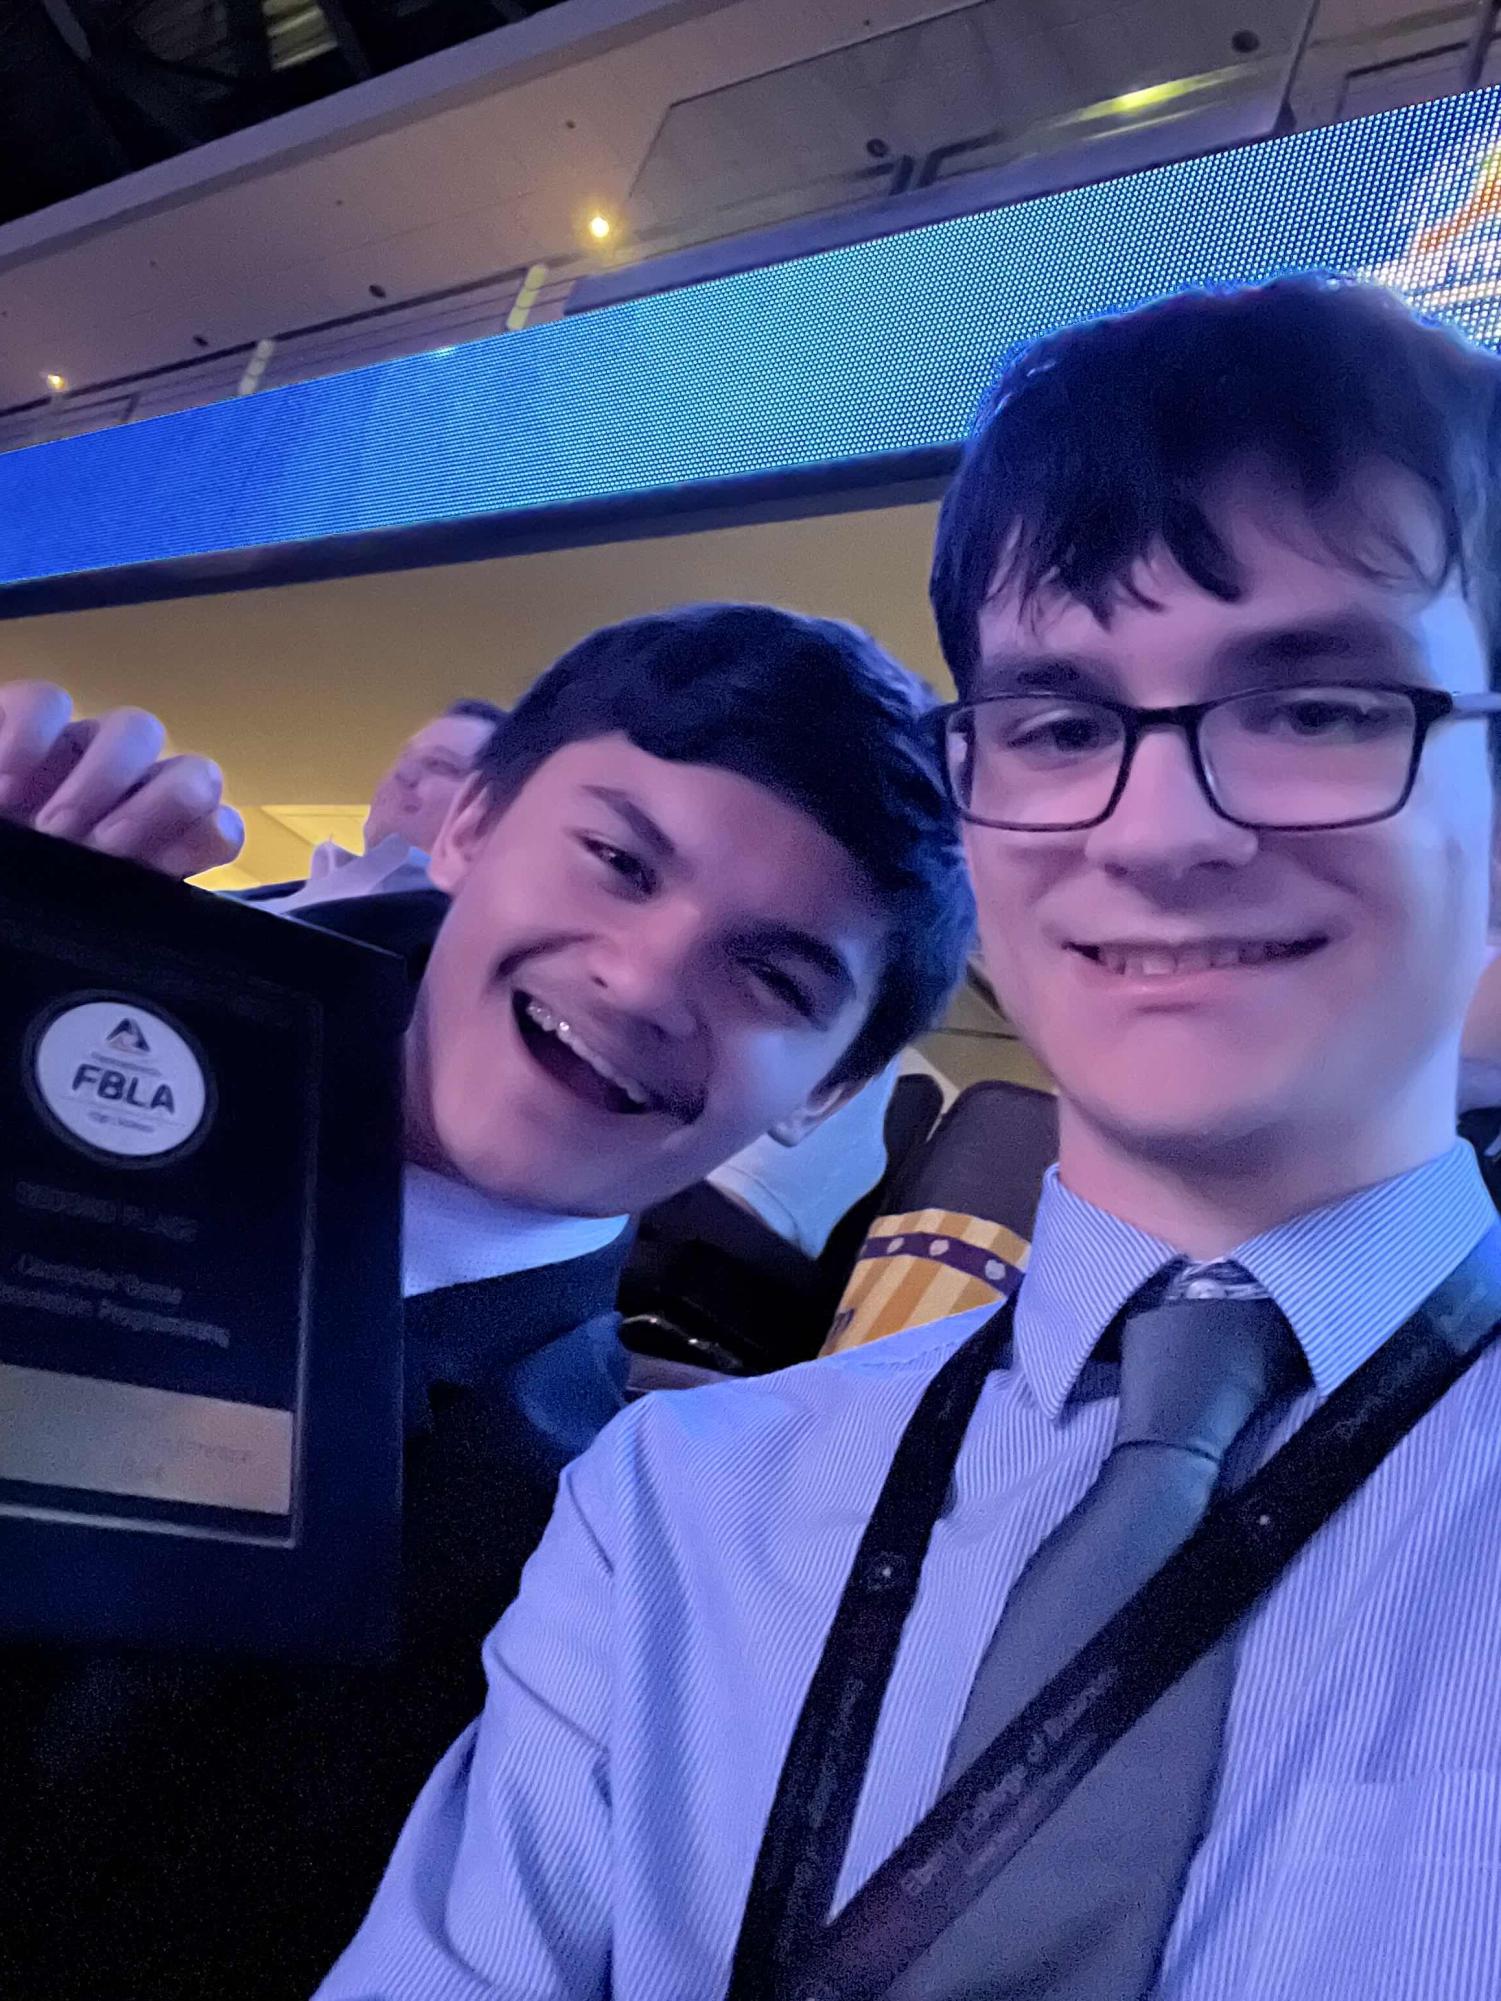 Climbing the steps. Yohn and Matosziuk celebrated their placement at the FBLA SLC after the awards ceremony on stage. (Courtesy of Connor Matosziuk)